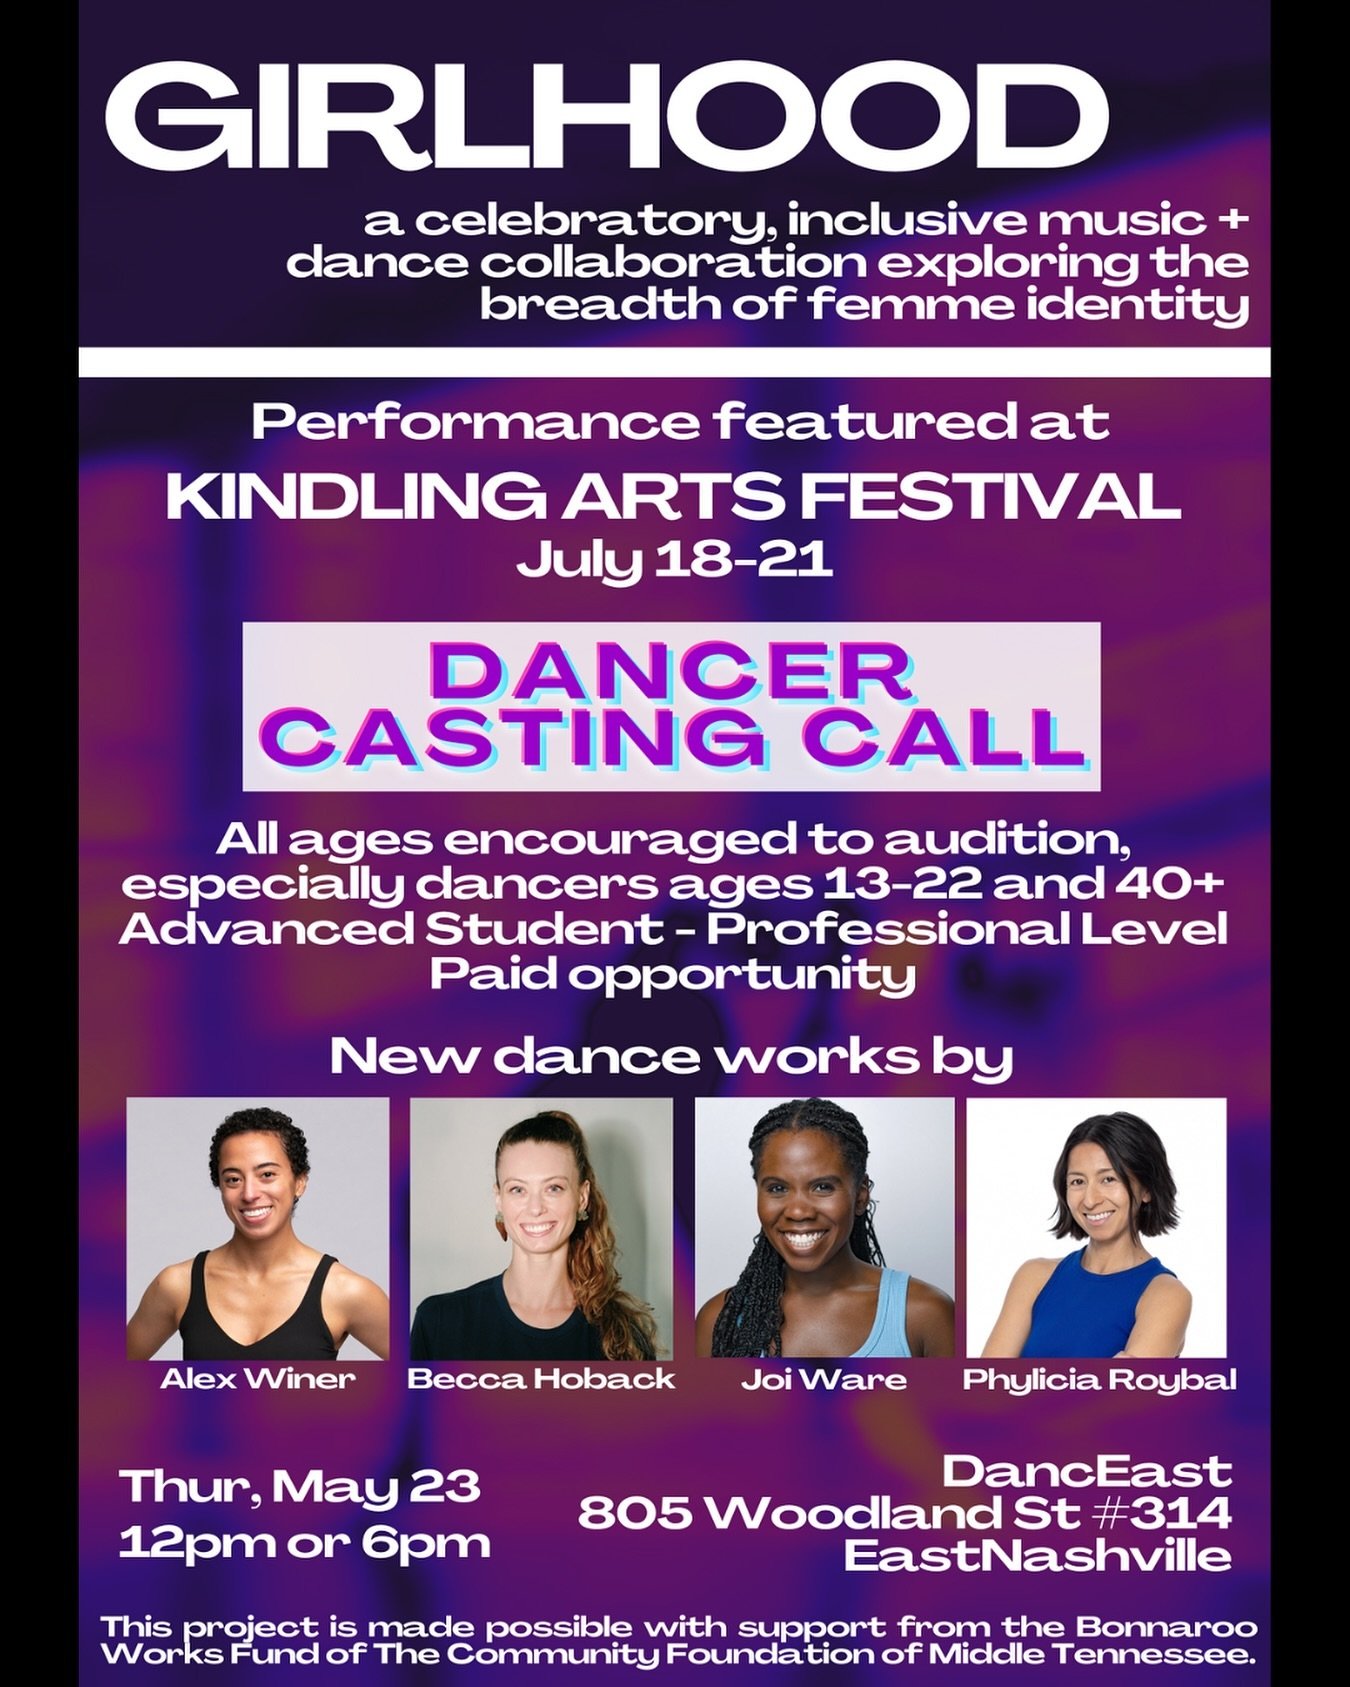 Calling Nashville Dancers!!! I&rsquo;m so excited to share a project that I&rsquo;m producing and choreographing for - just one of the ways I&rsquo;ll be interacting with Kindling Arts Festival this year!! Please join us for a casting call / audition